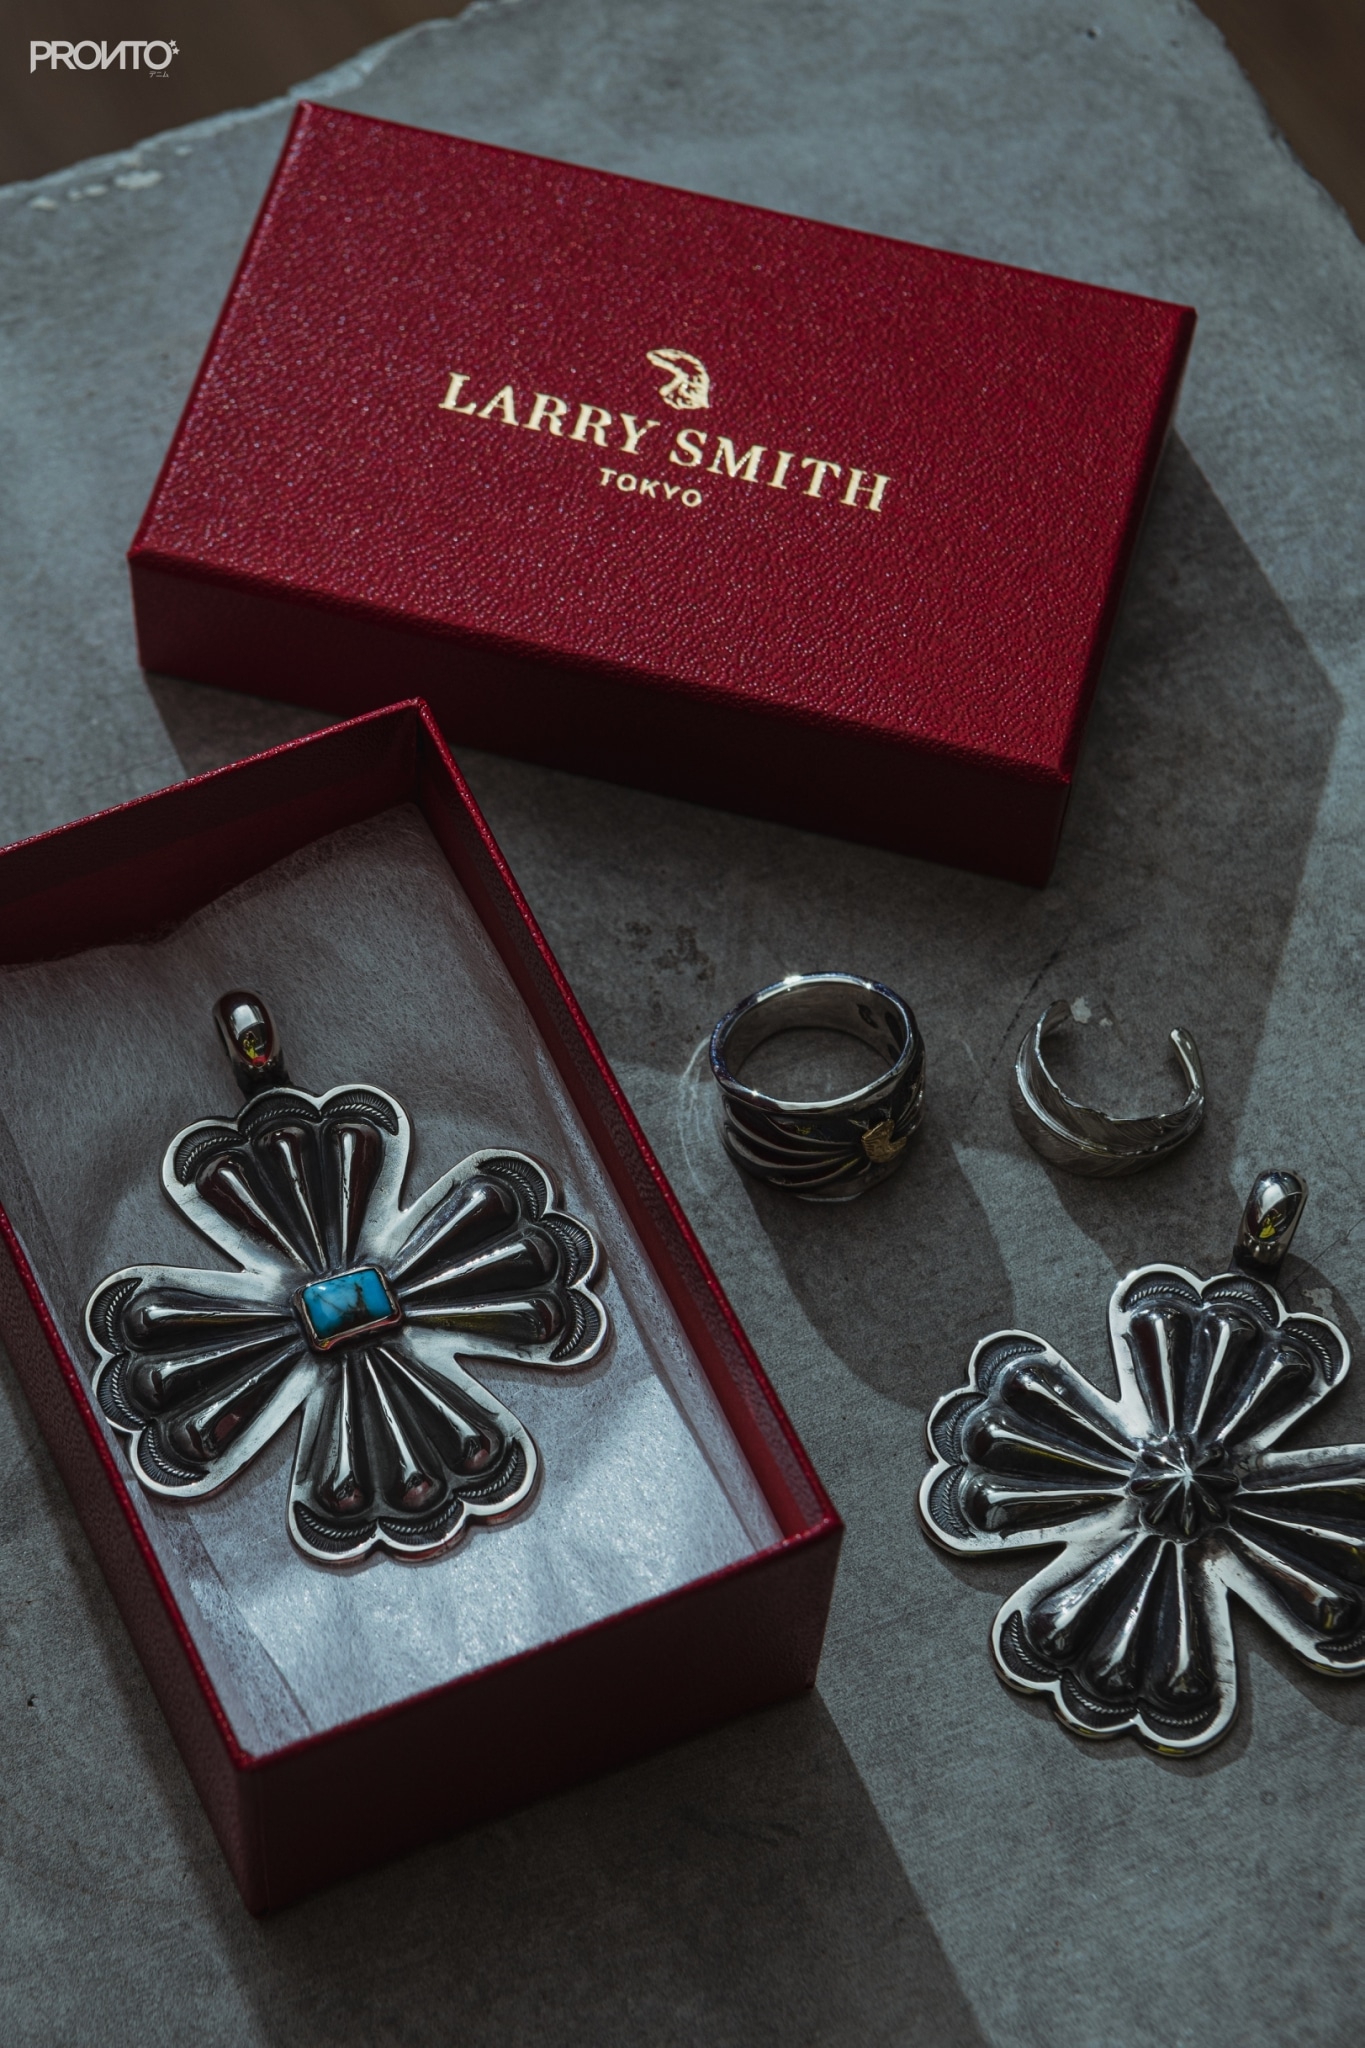 NEW ARRIVAL : LARRY SMITH